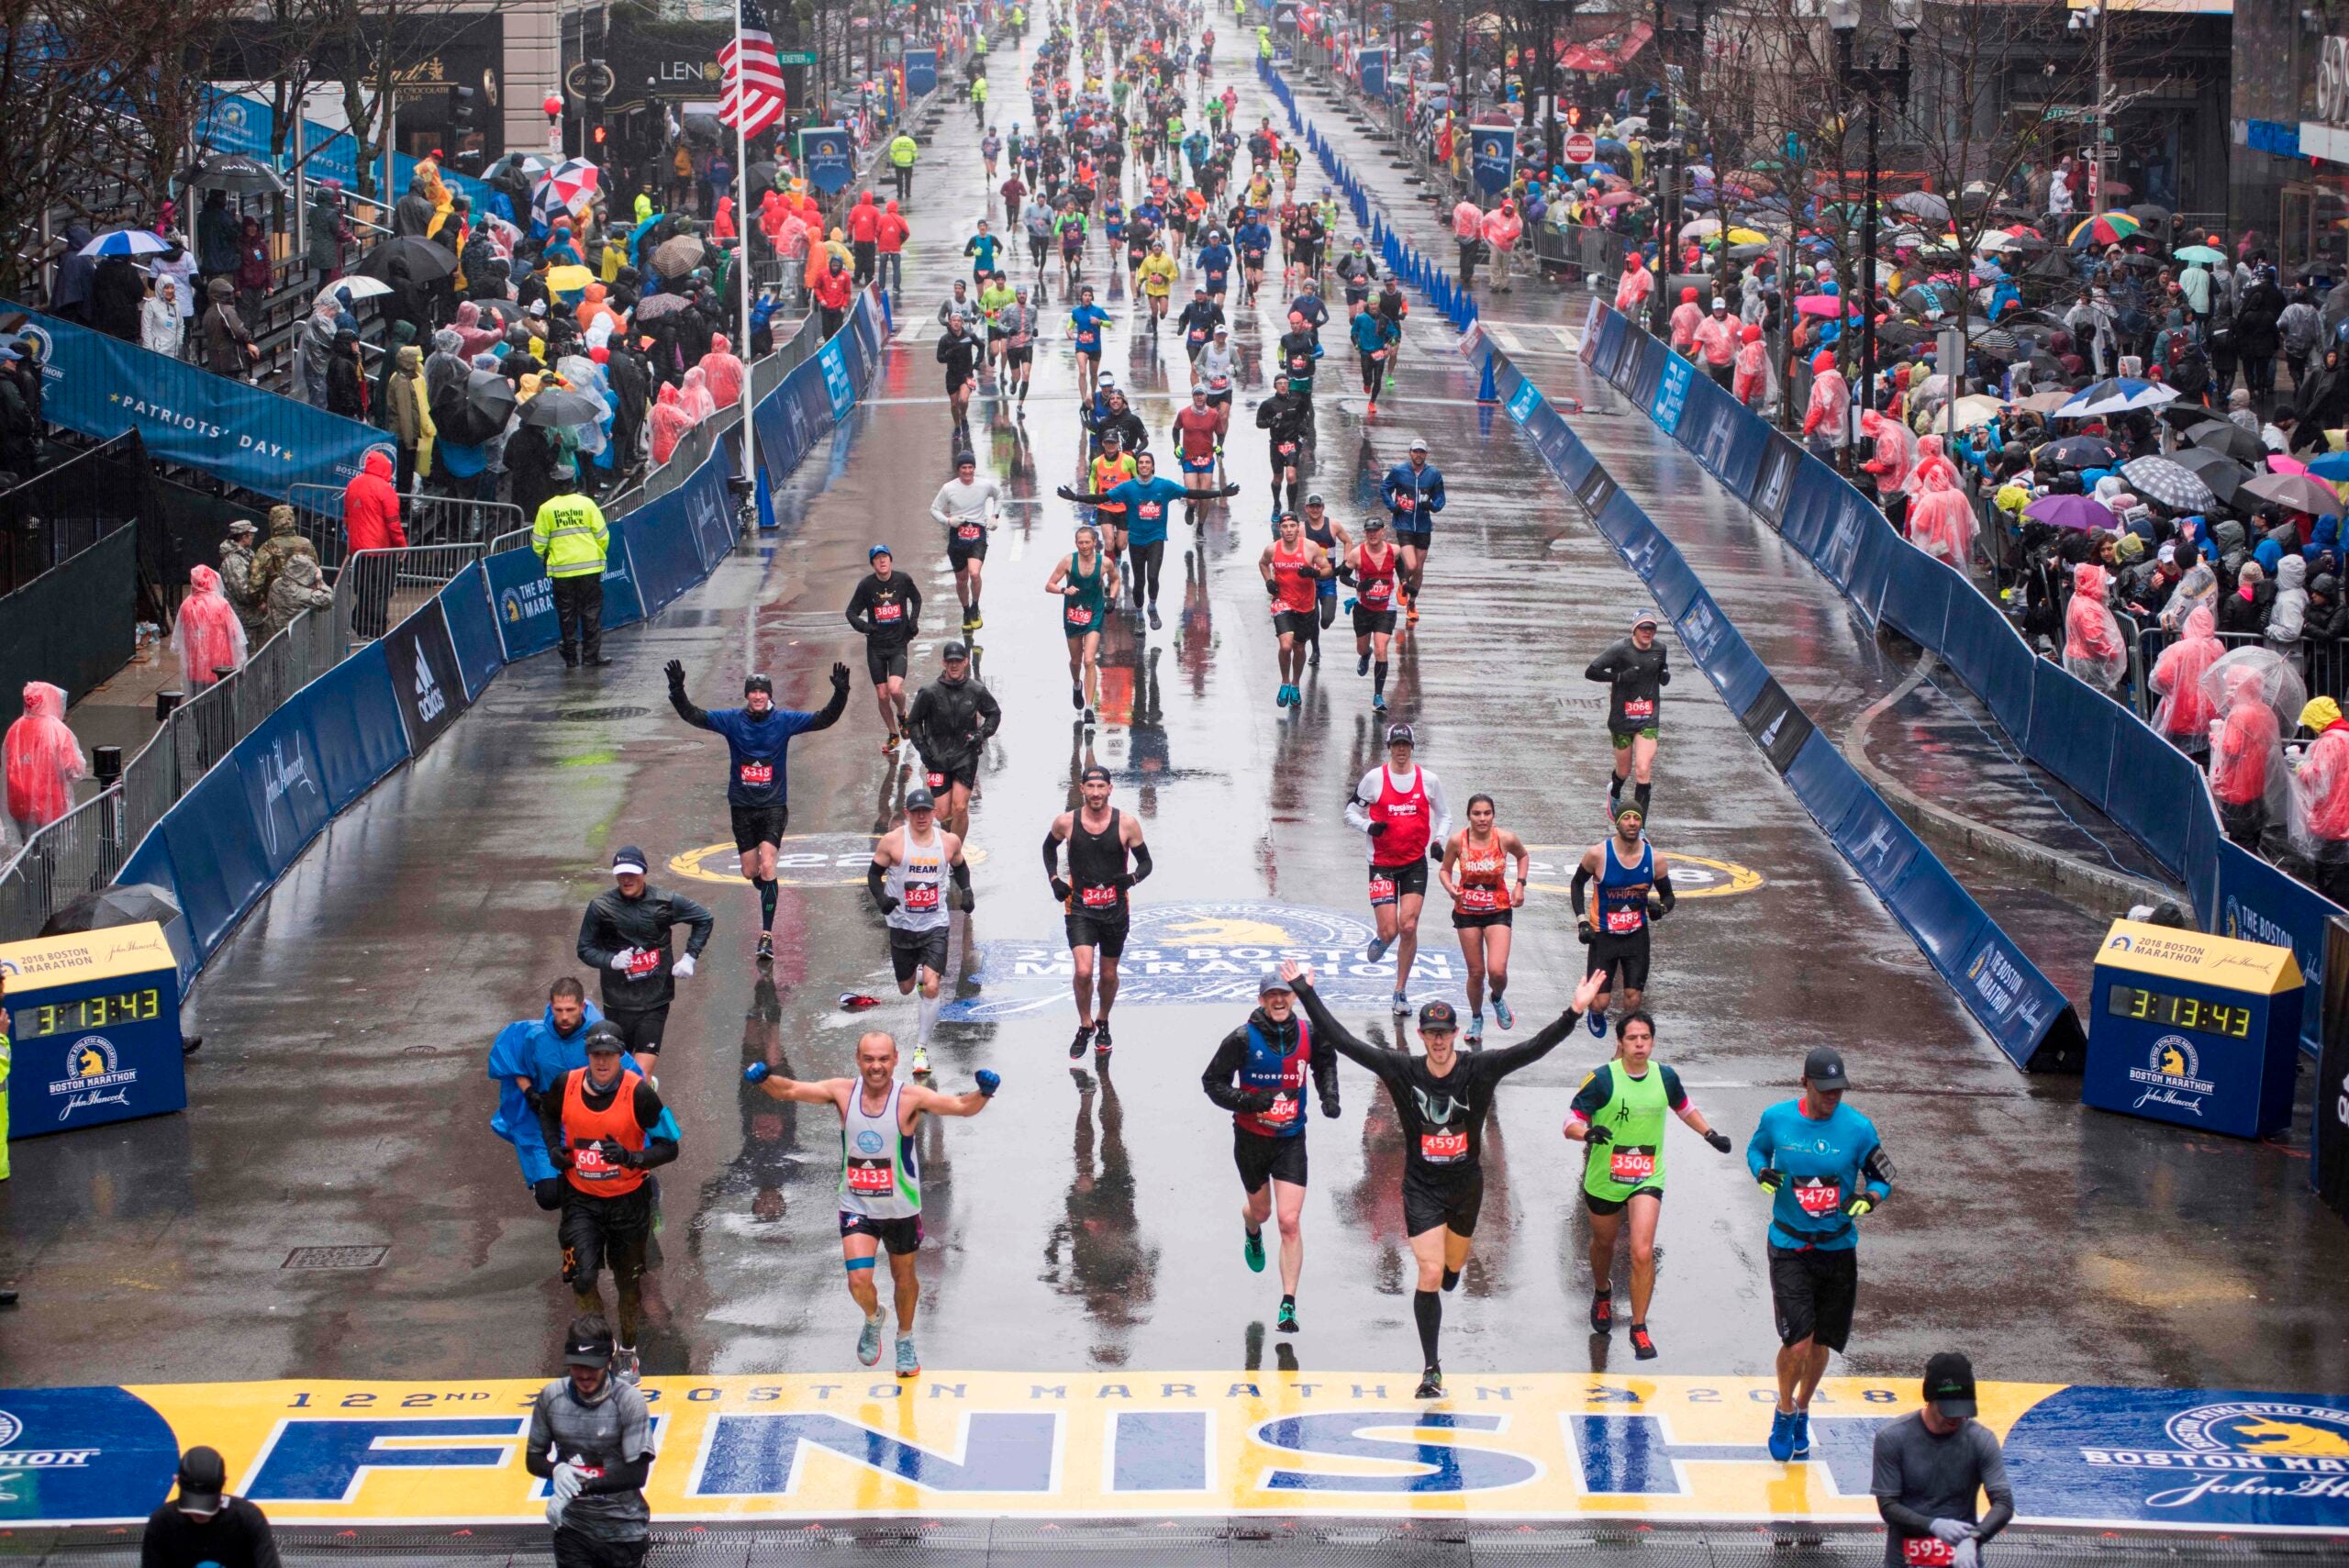 Runners come to the finish line of the 122nd Boston Marathon.